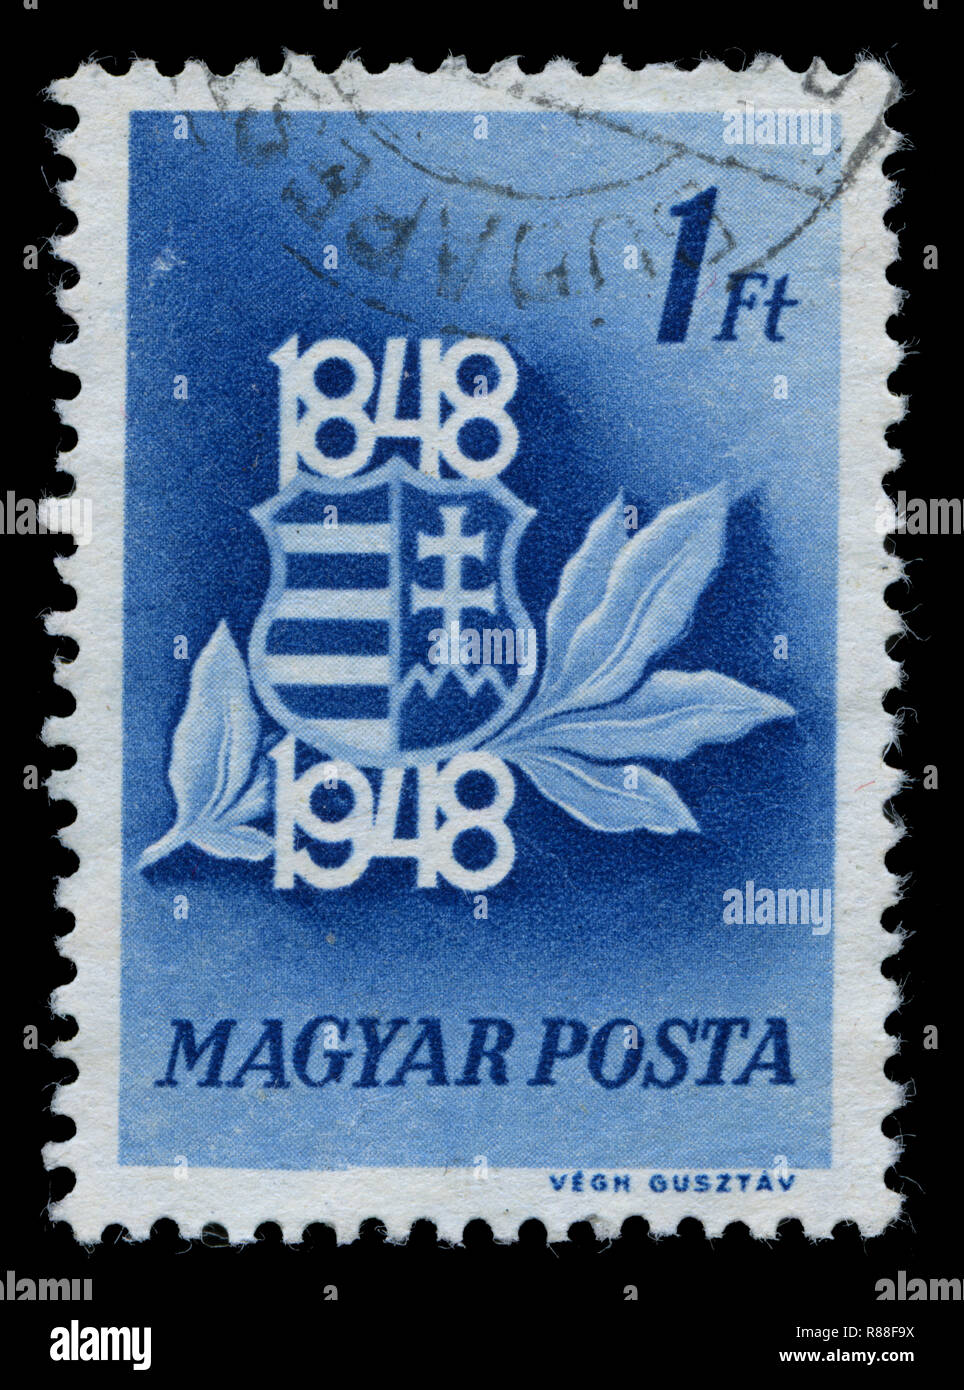 Postage stamp from Hungary in the Cent. of 1848-49 revolution and war of independence series Stock Photo